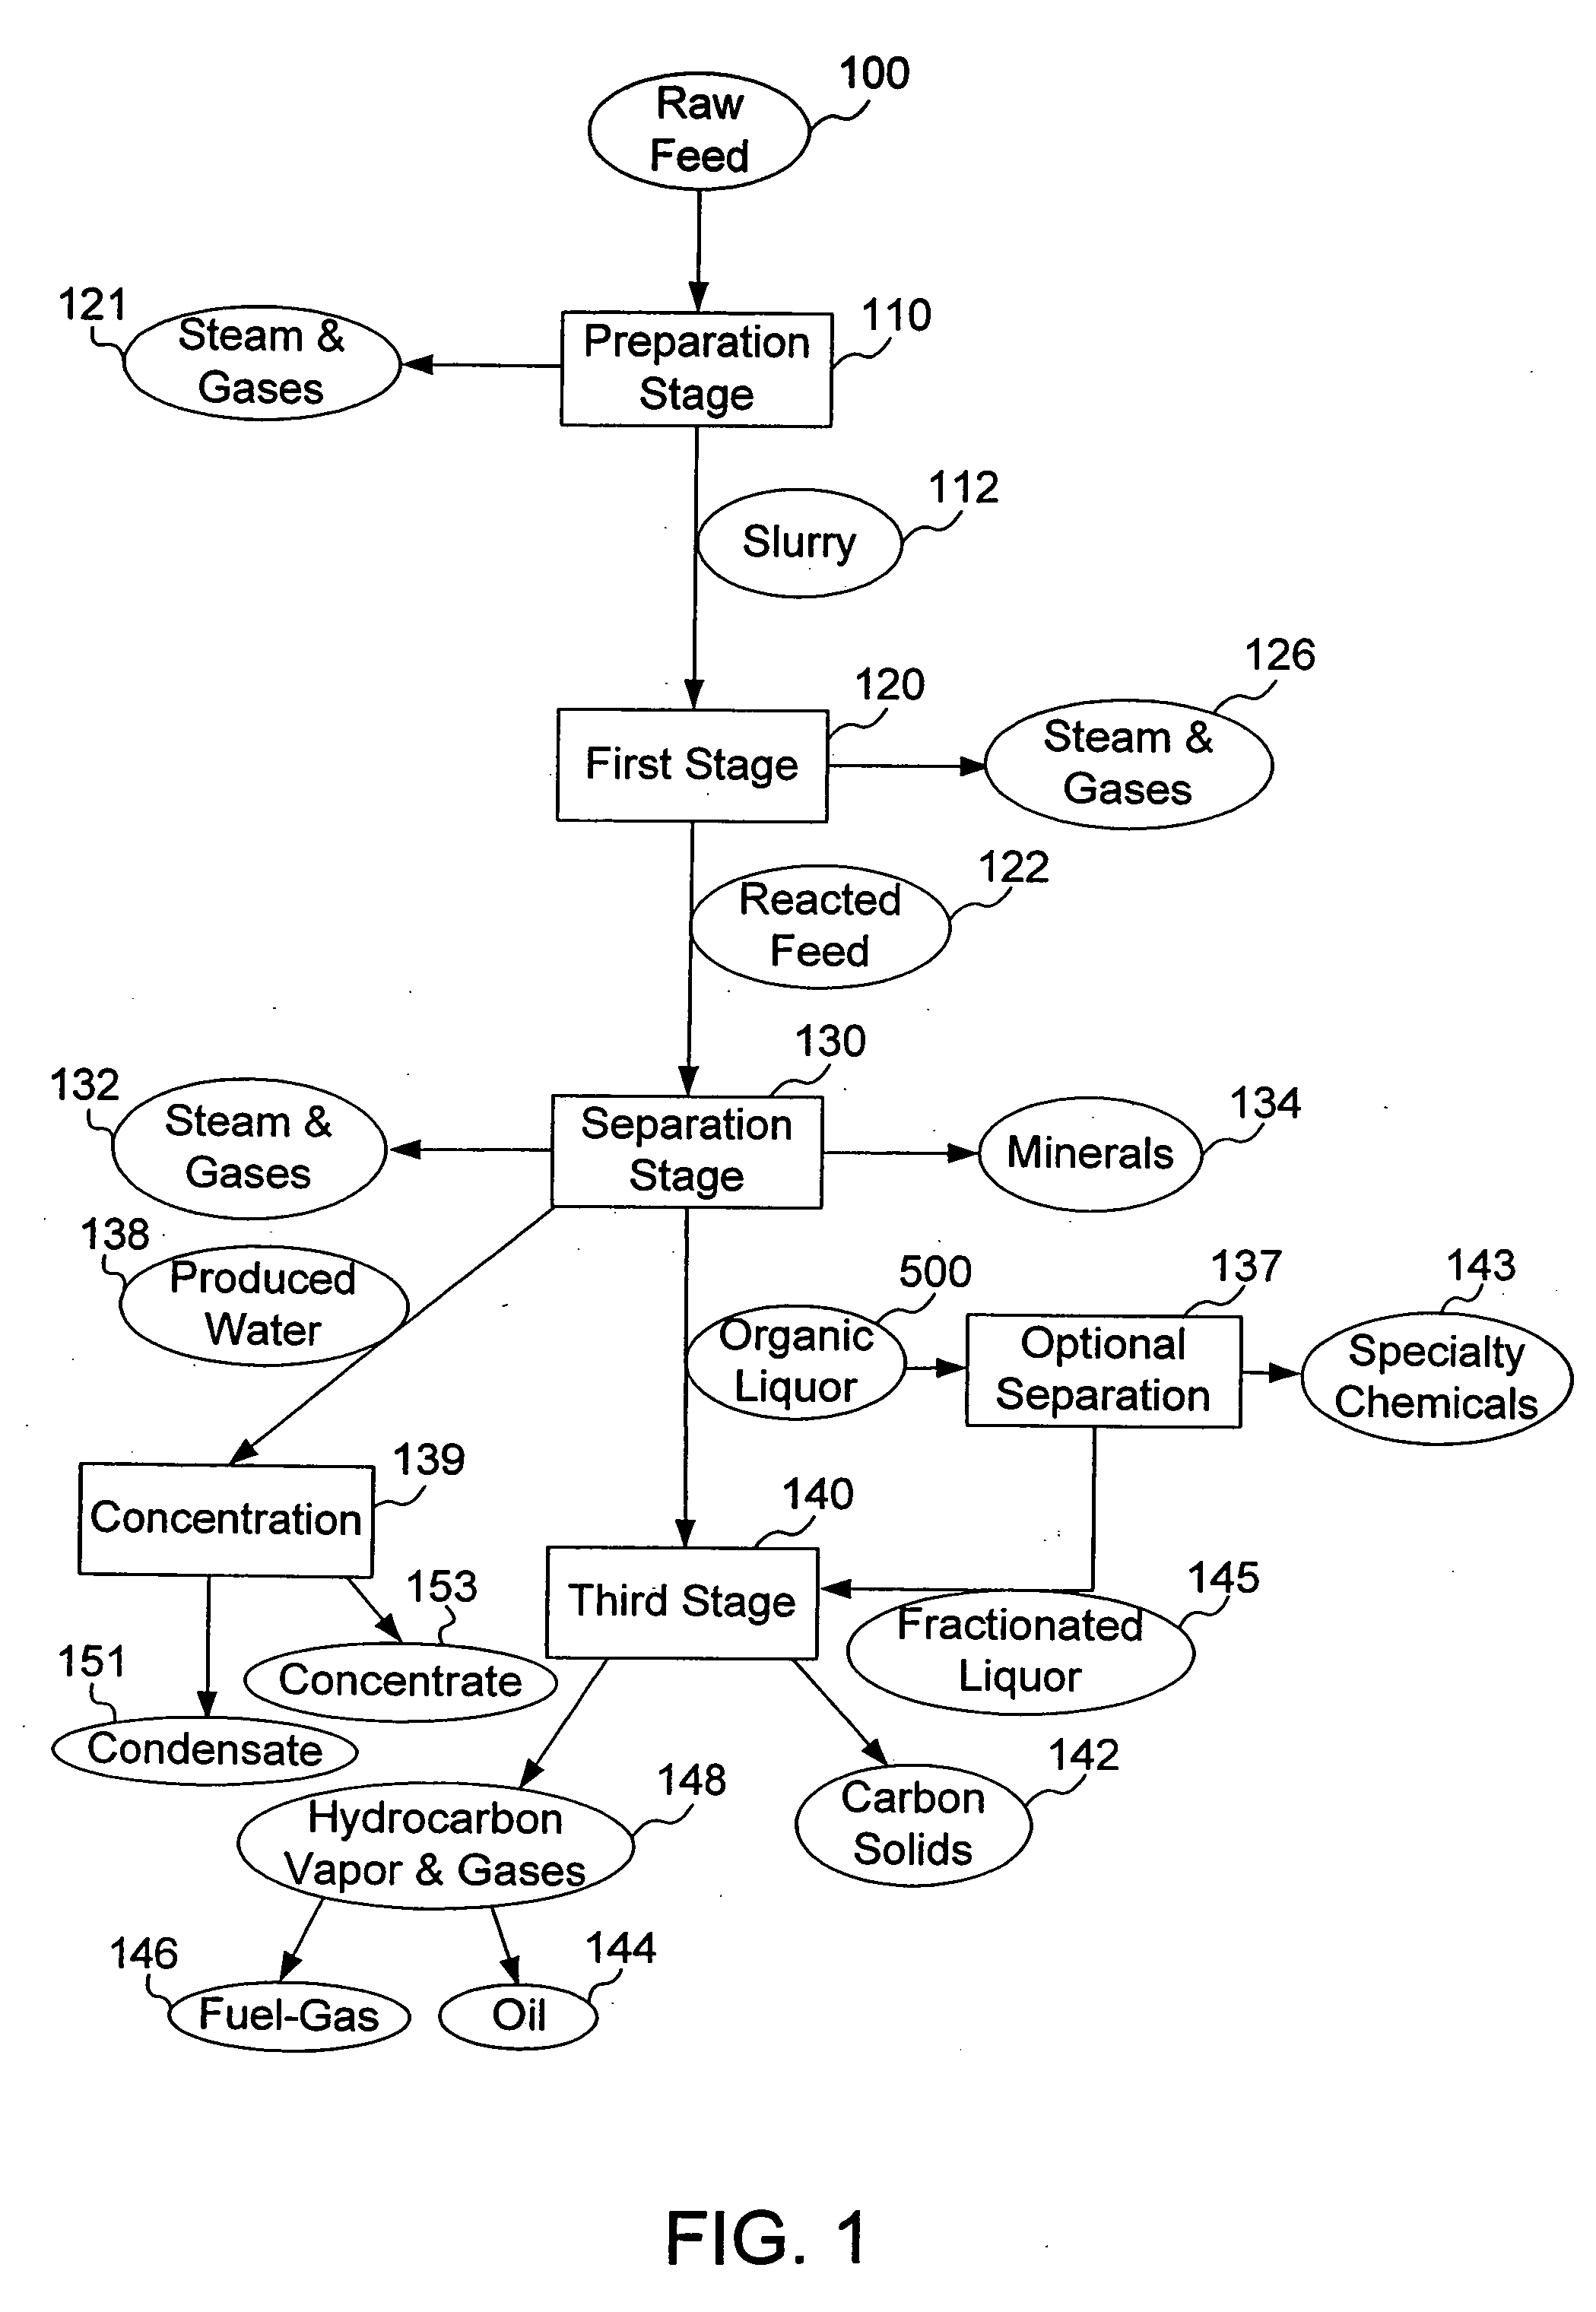 Process for conversion of organic, waste, or low-value materials into useful products